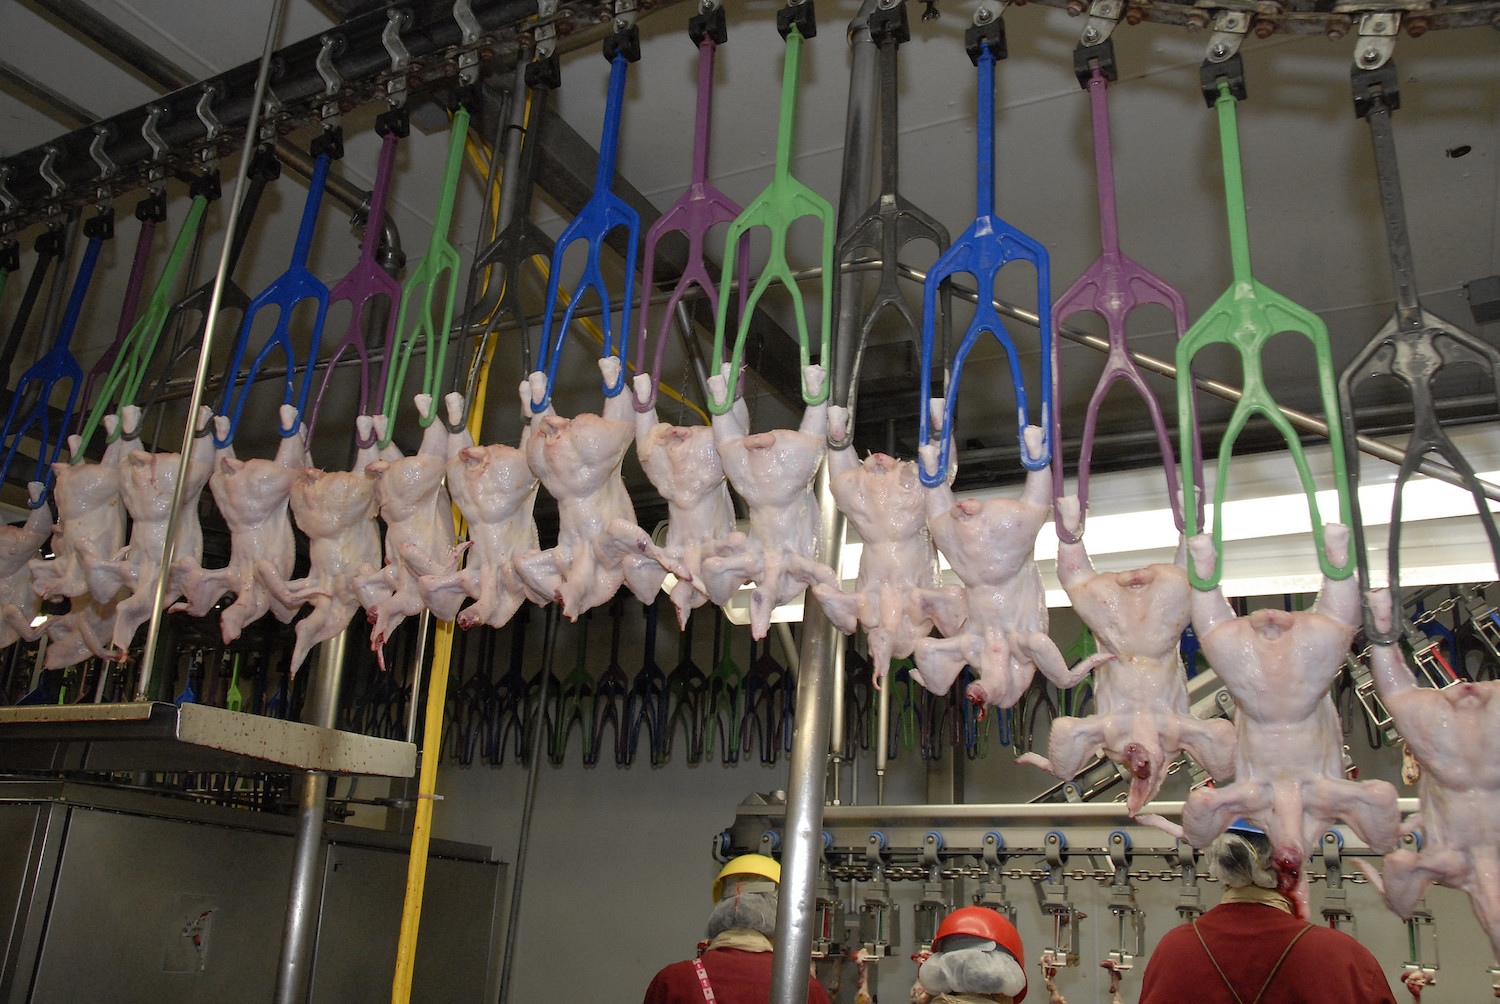 Chickens in a slaughterhouse.